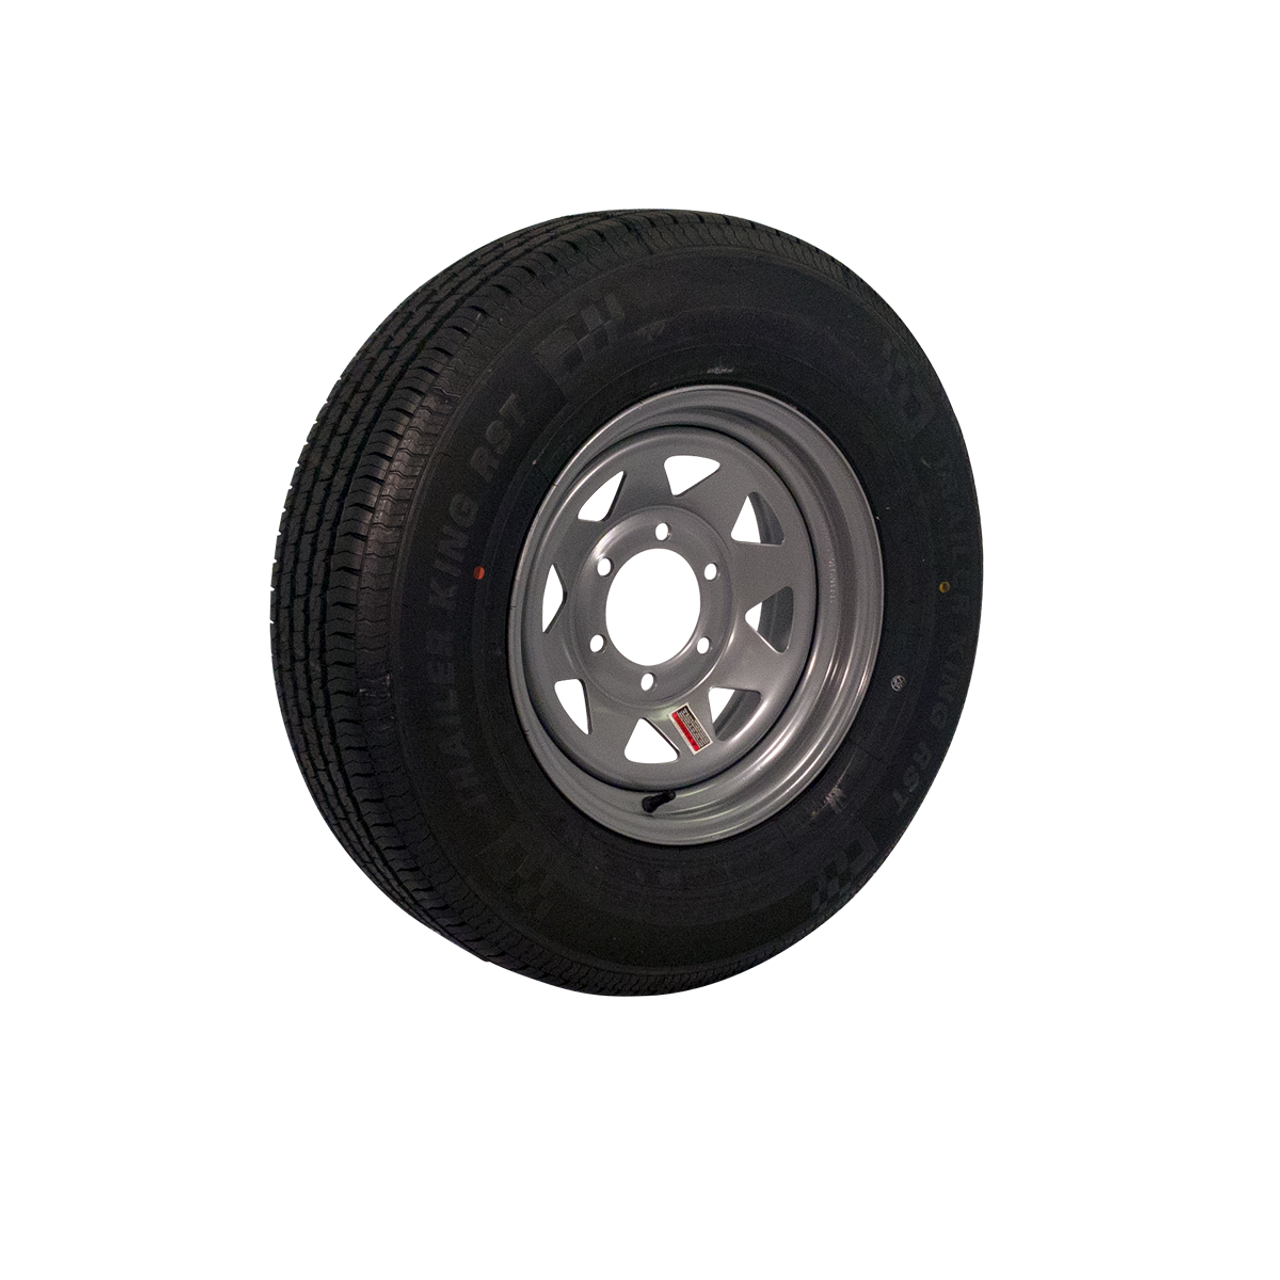 WT15-5SSR --- 15" Silver Spoke Trailer Wheel and Tire Assembly, 5 on 4.5"